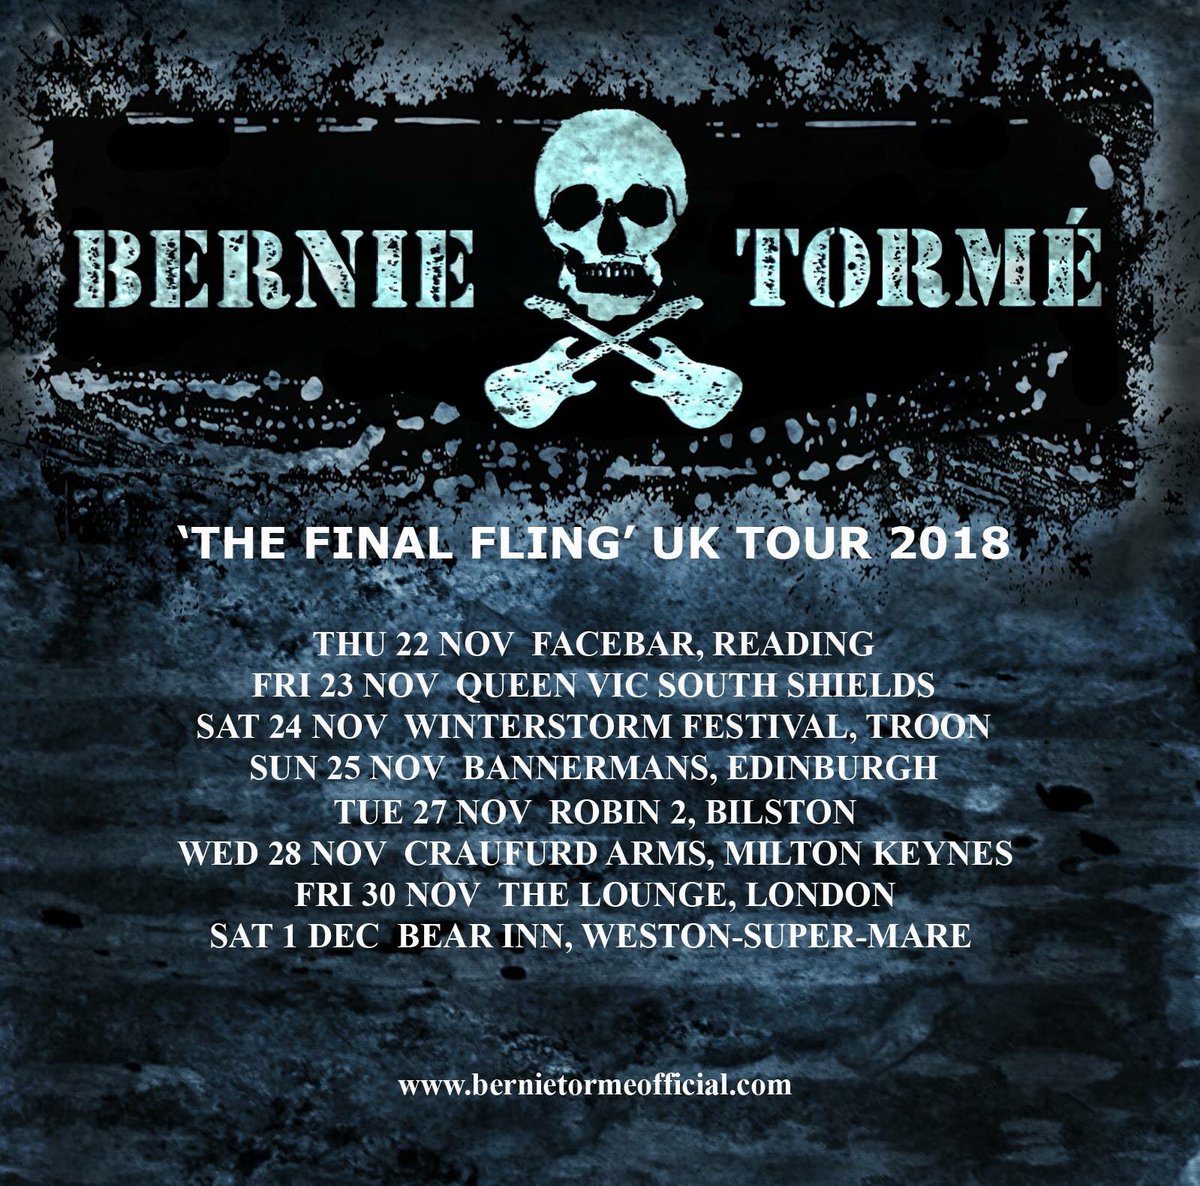 ‘THE FINAL FLING’ UK TOUR 2018 Last orders at the bar… Guitar legend Bernie Tormé (Gillan, Ozzy Osbourne, Dee Snider) will be heading out on tour for the final time in the U.K. later this year. @Bernie_Torme bernietormeofficial.com